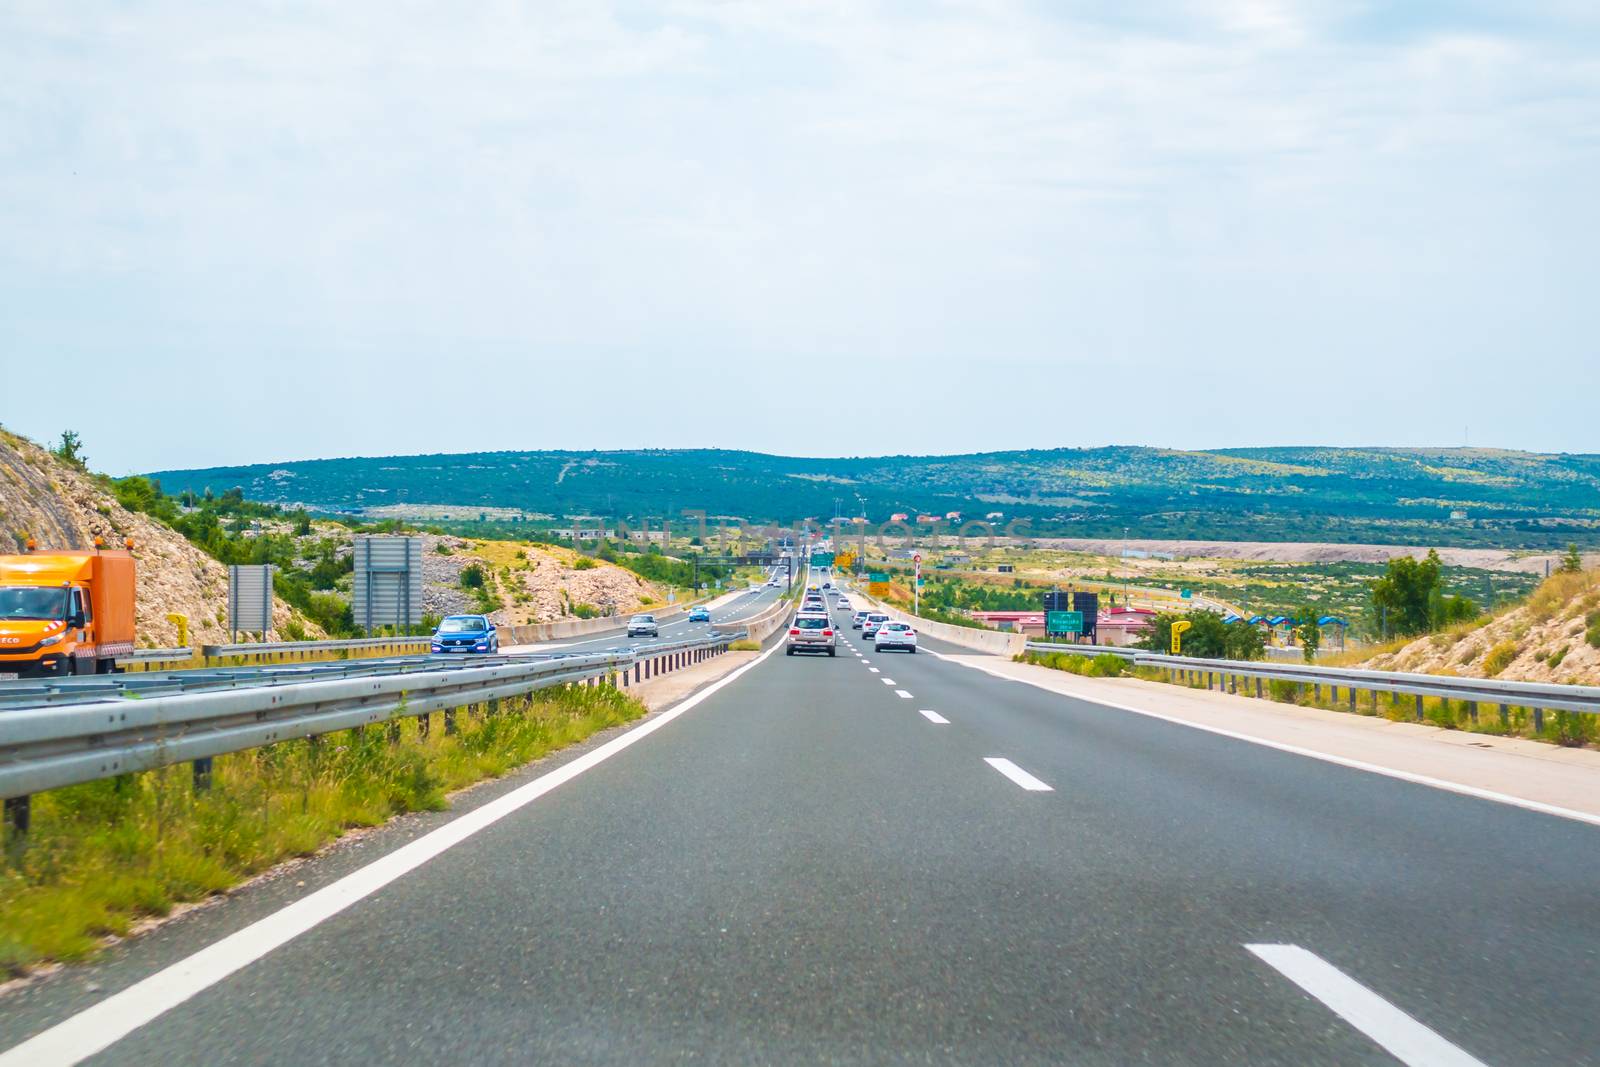 Highway A1 vicinity of Zadar, Croatia, July 1 2018: A1 Highway in Croatia from Zagreb to Split and Adriatic sea is one of the busiest highways during holiday season